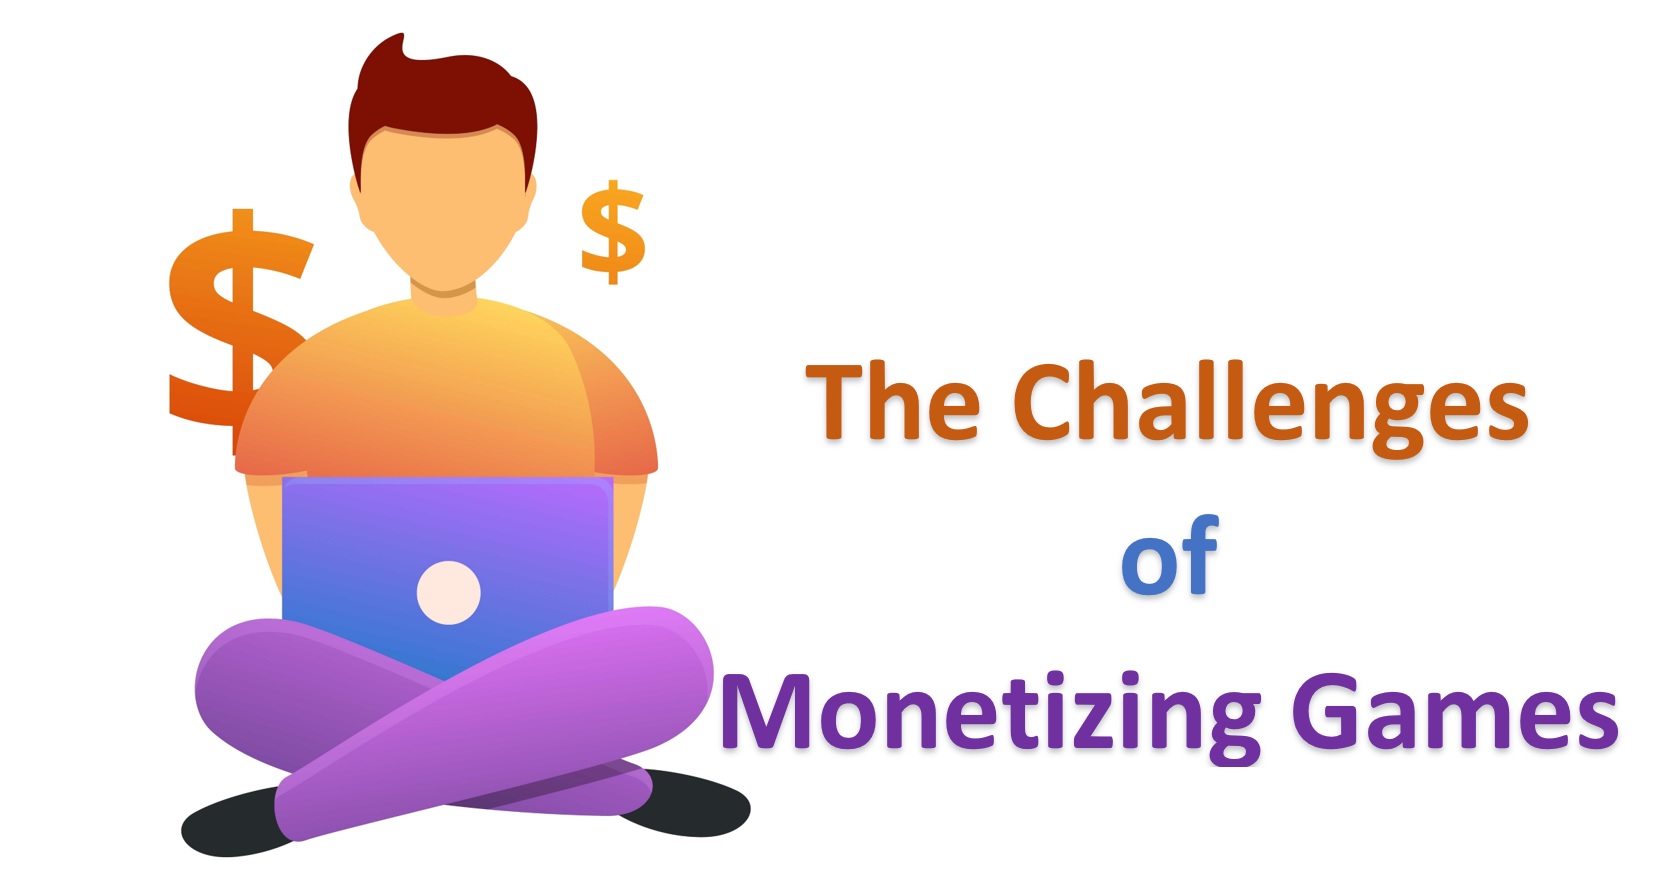 The Challenges of Monetizing Games